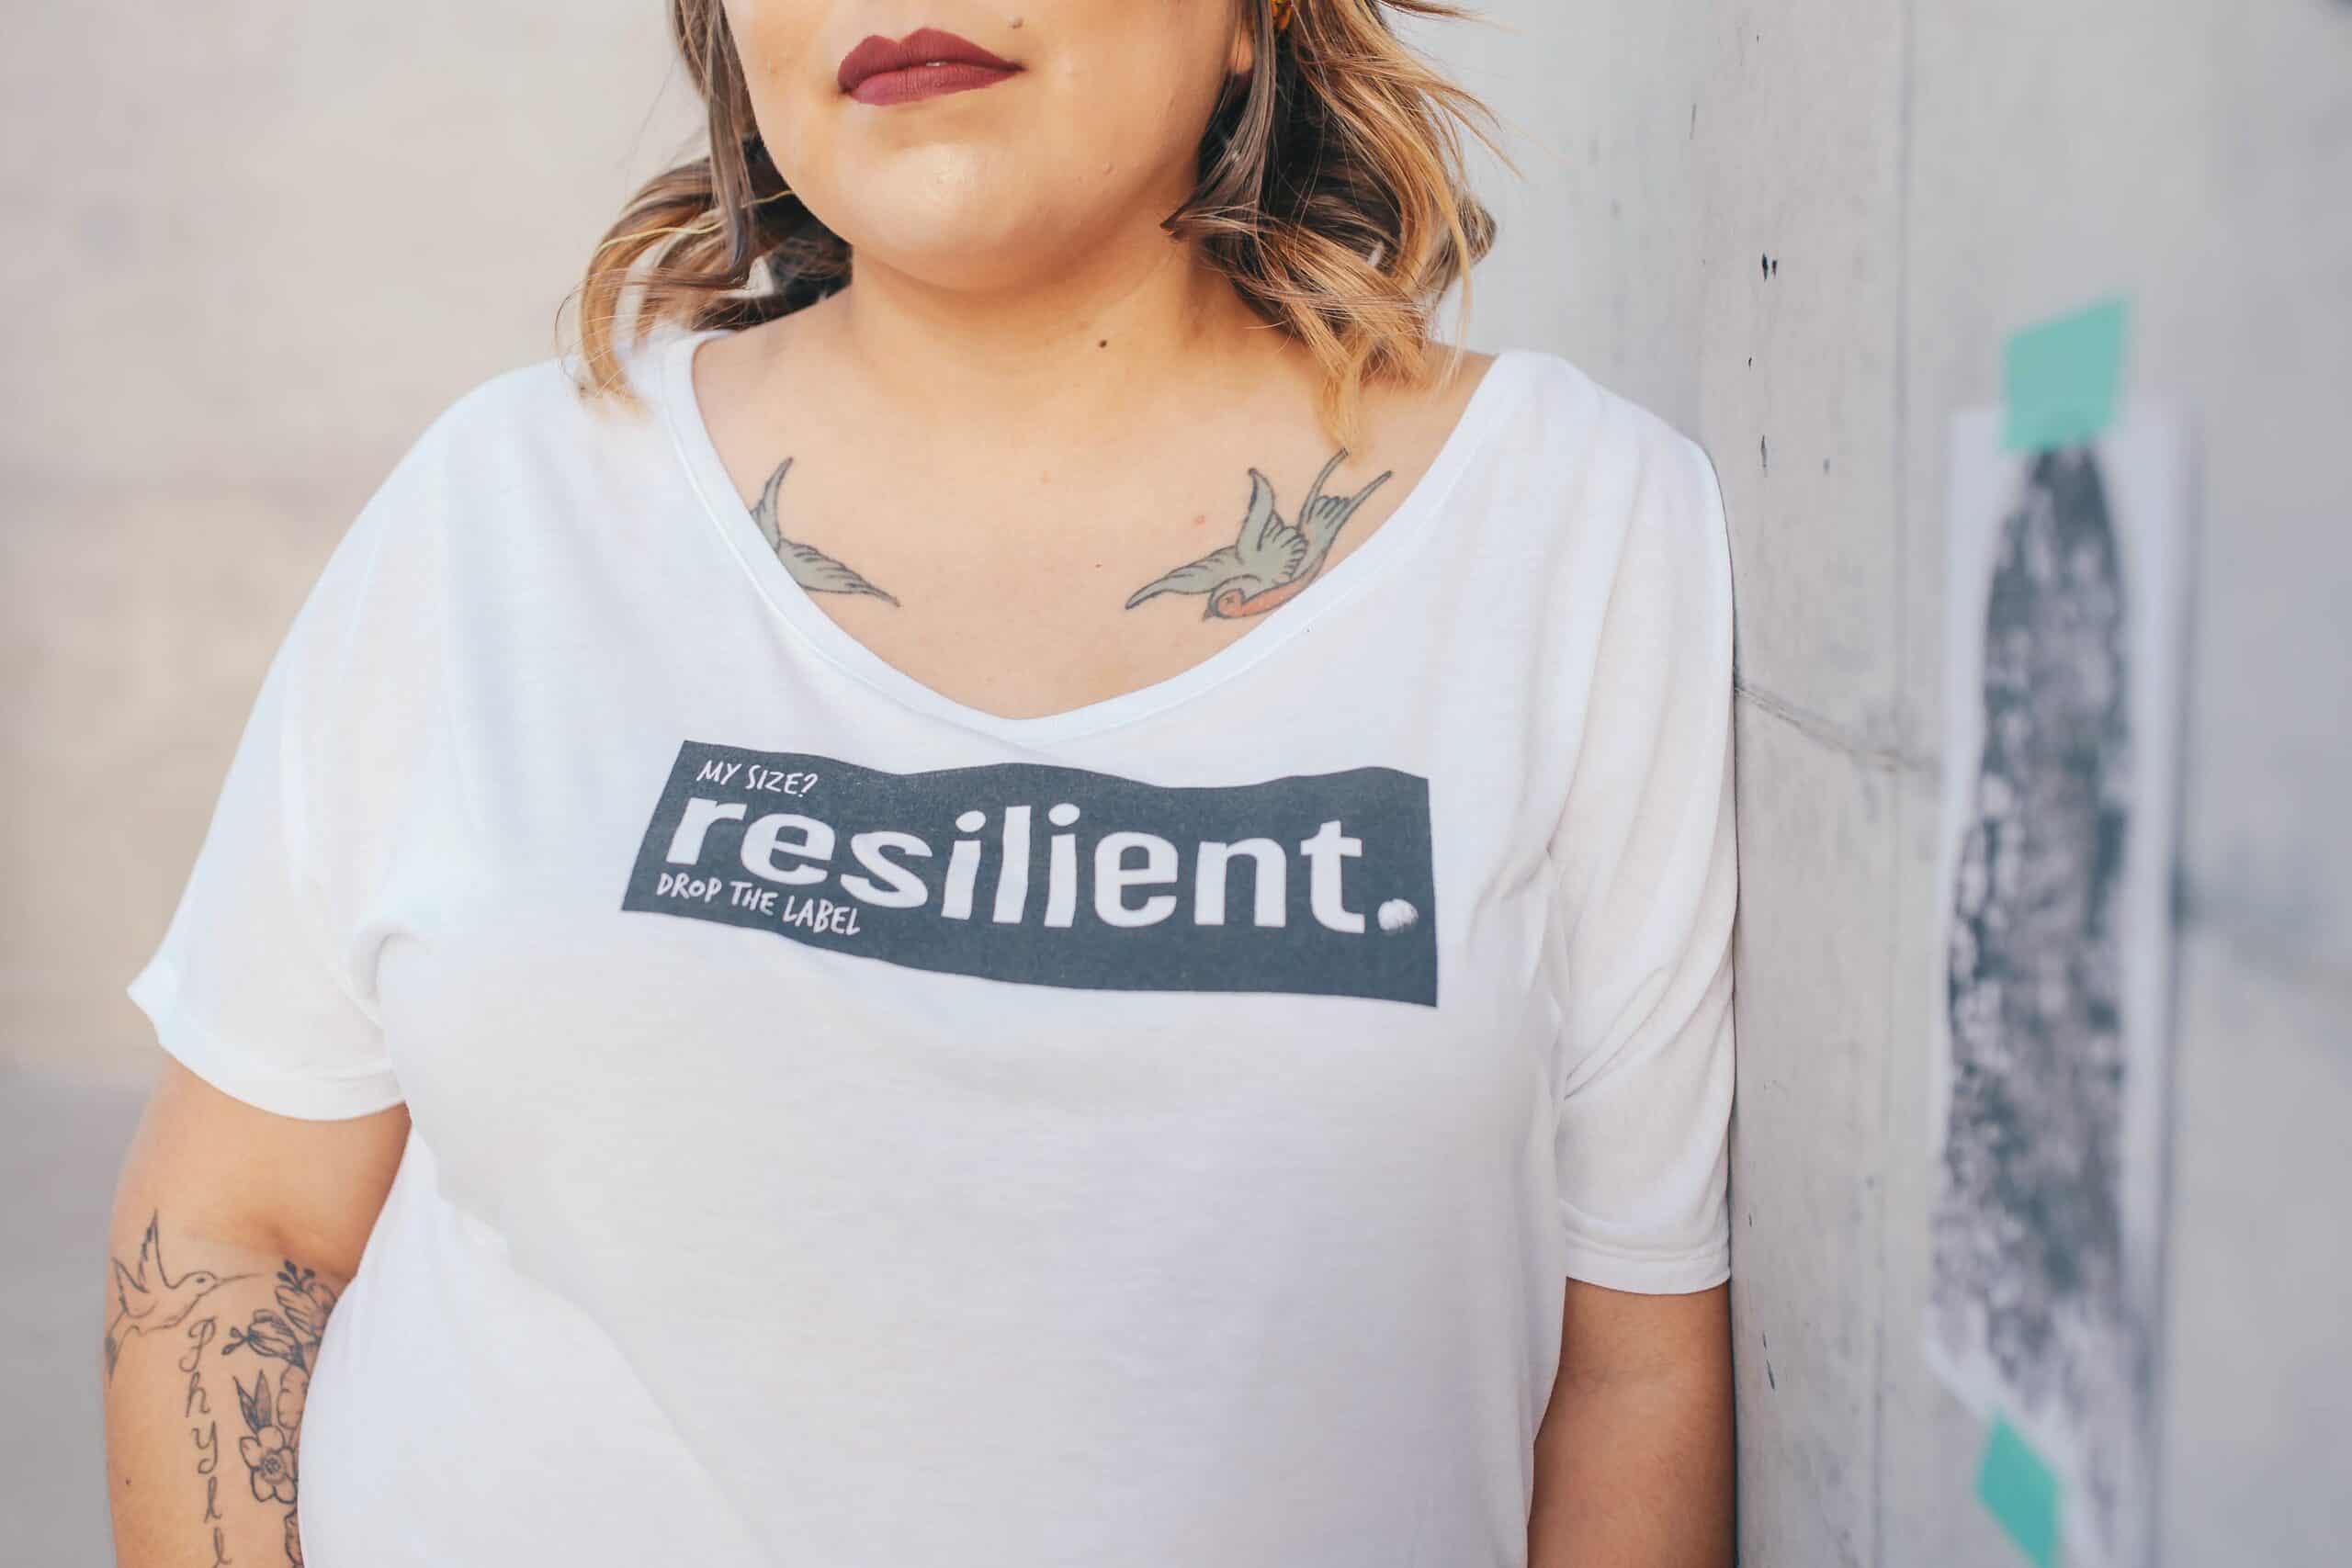 8 Traits of the Most Resilient Person